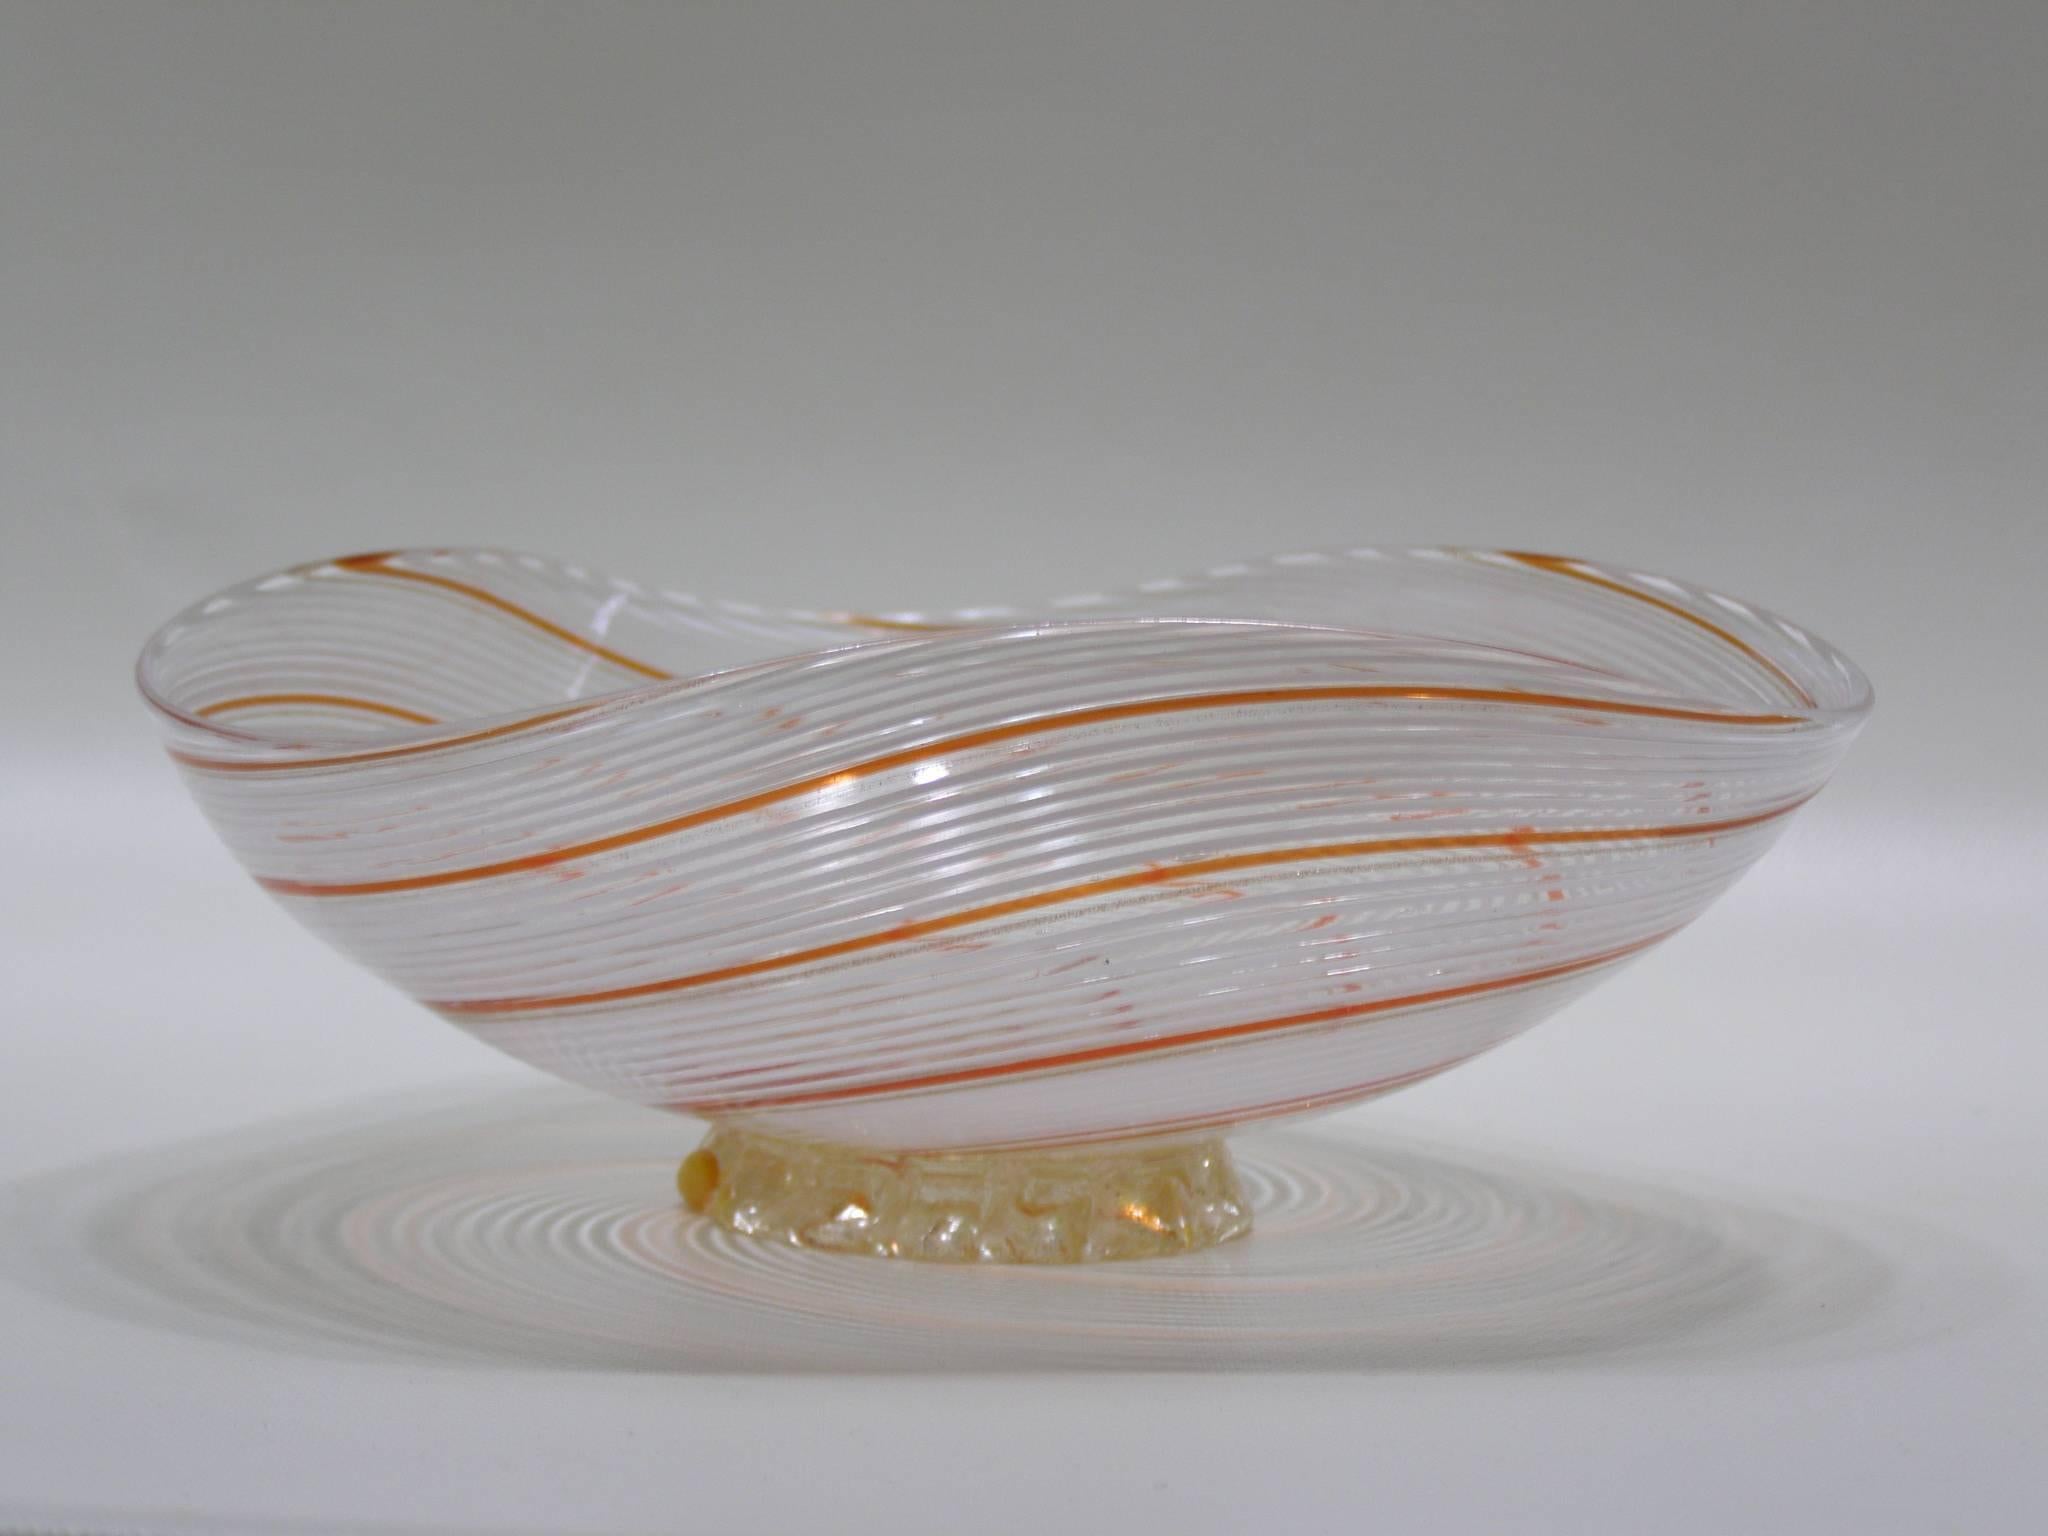 Beautiful Dino Martens handblown Murano glass small catchall bowl with white filigrana combined with an orange swirl stripe and a fused glass base filled with gold leaf flecking. Great on tabletop for useful items and a beautiful display.